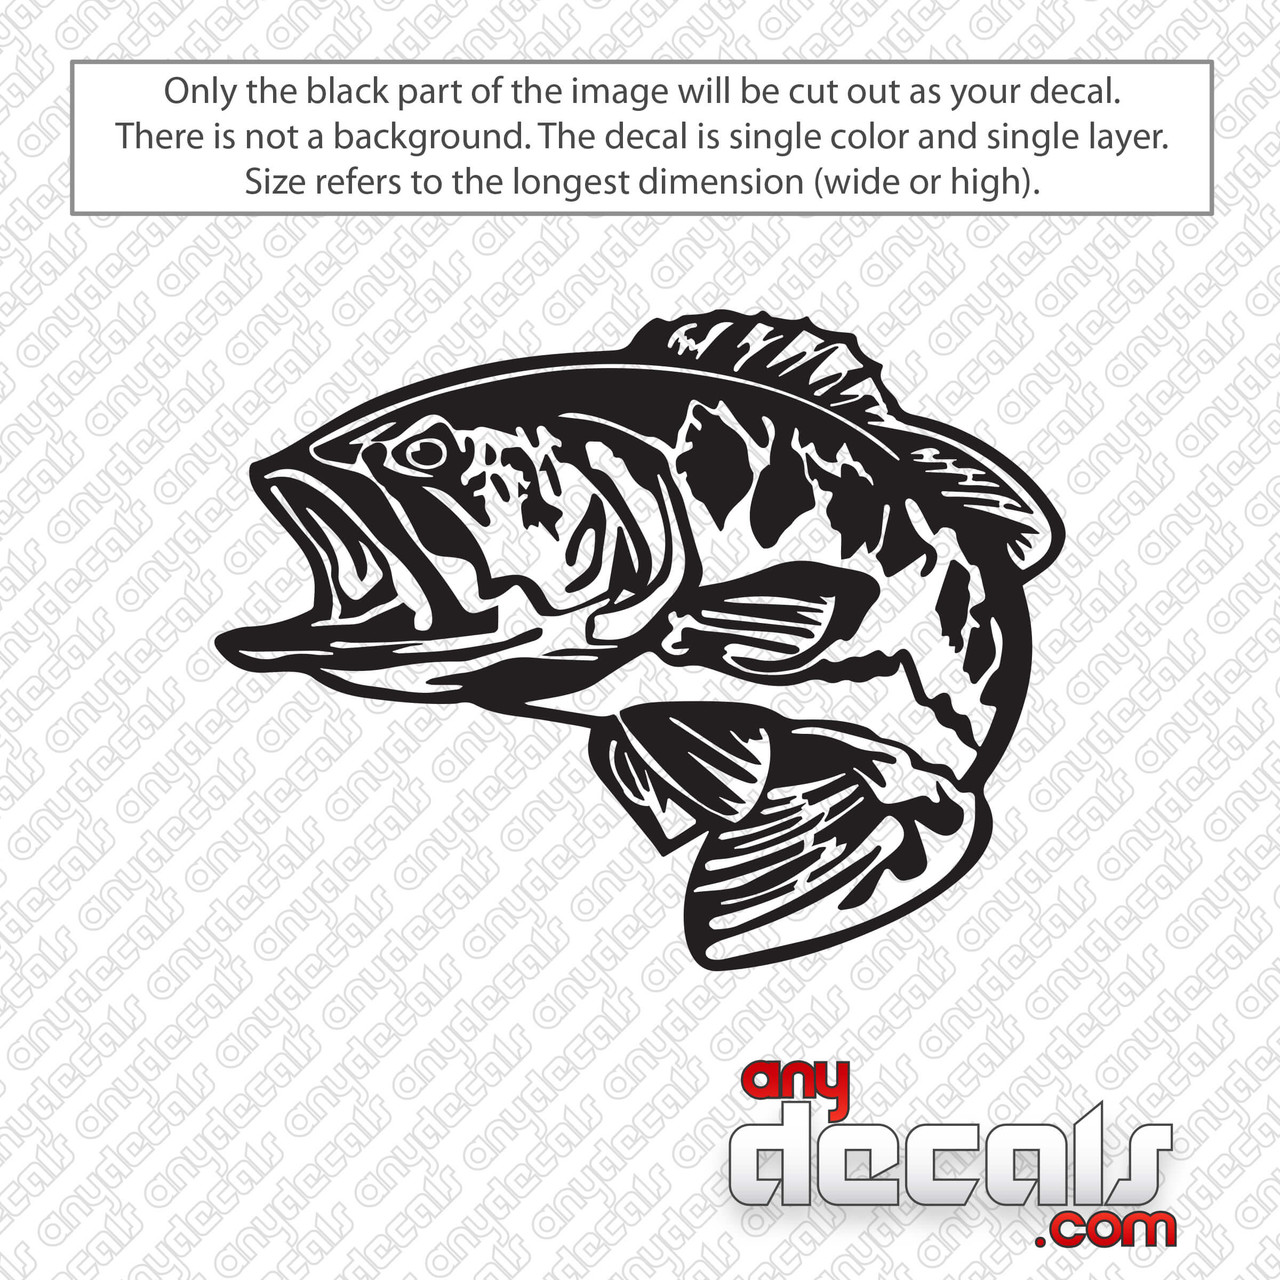 https://cdn11.bigcommerce.com/s-df97c/images/stencil/1280x1280/products/992/1994/bass-fish-fishing-decal-sticker__99950.1594261618.jpg?c=2?imbypass=on